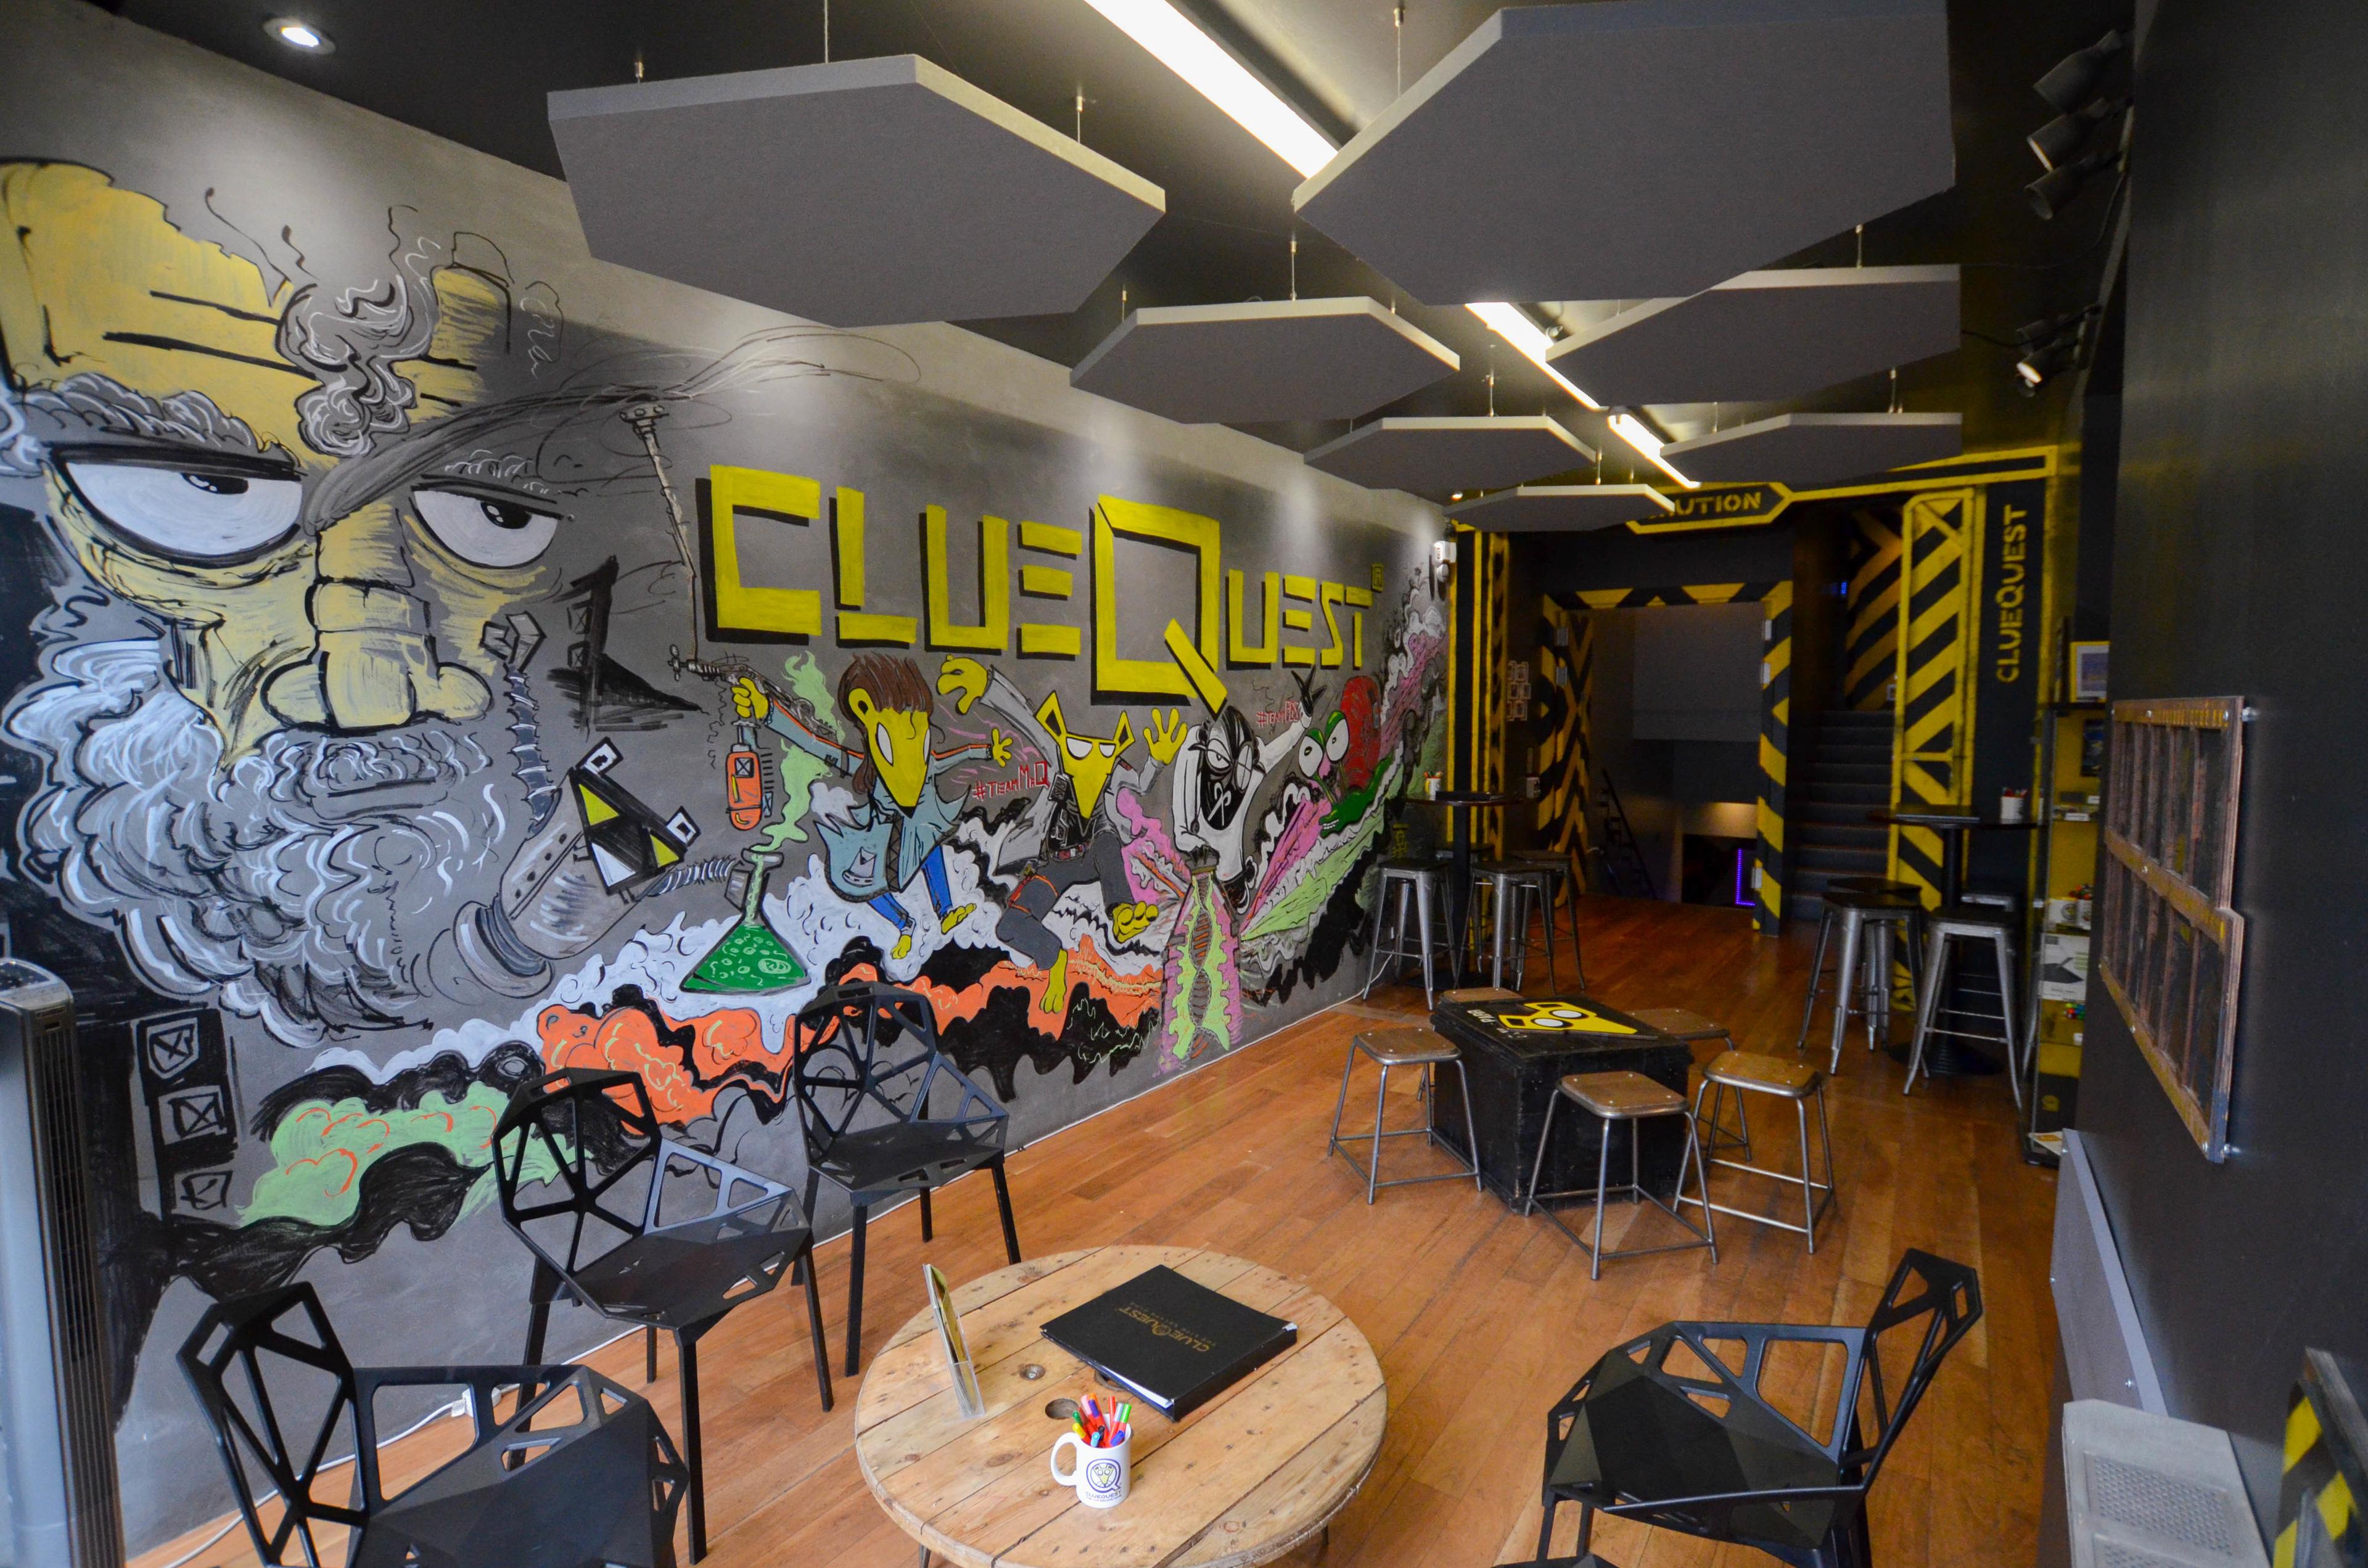 Escape Rooms, clueQuest Escape Rooms And Meeting Spaces photo #1